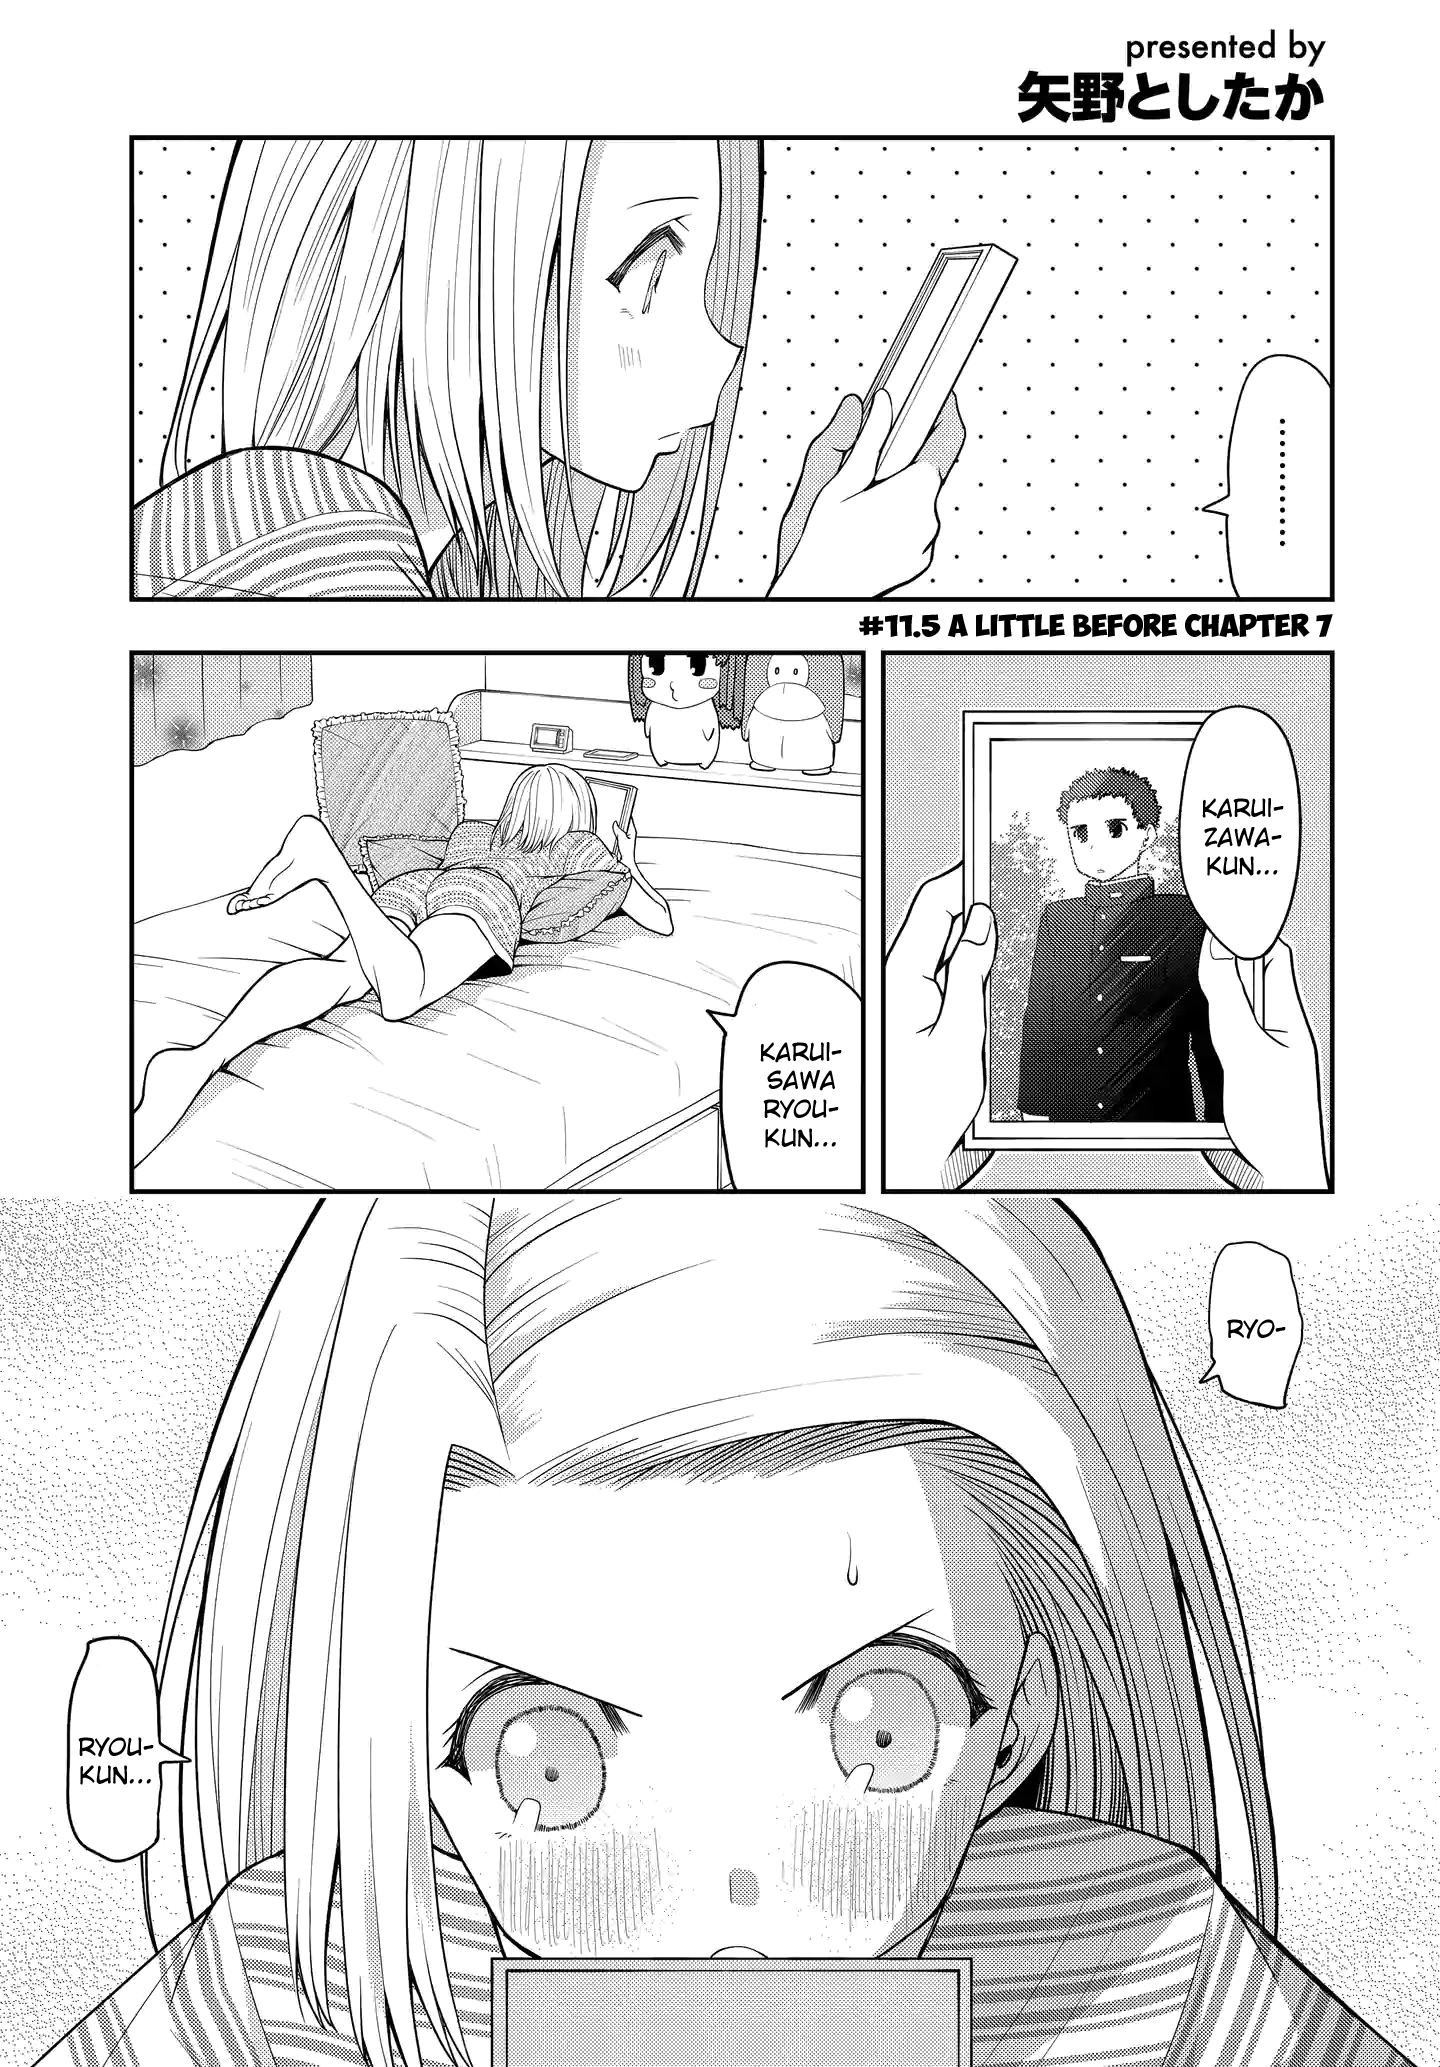 Omoi Ga Omoi Omoi-San Vol.1 Chapter 11.5: A Little Before Chapter 7 - Picture 1